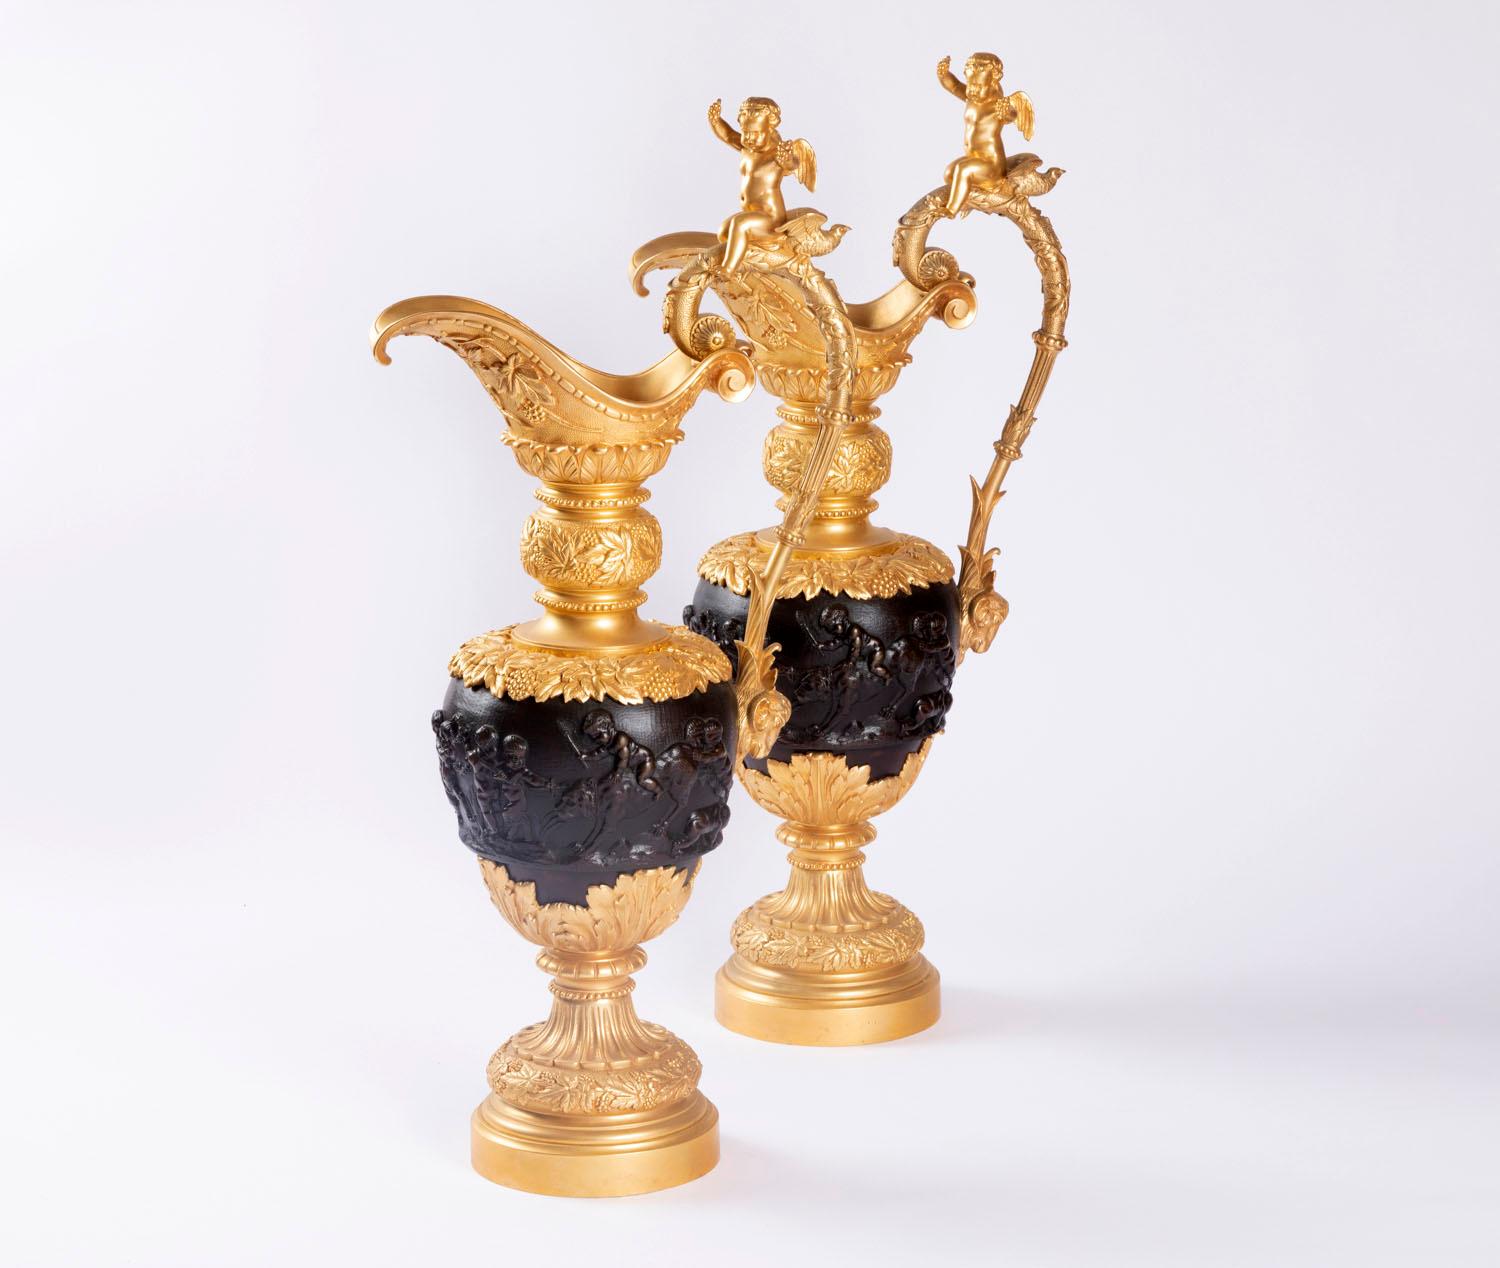 After Clodion.

Pair of bronze ewers with two patinas representing bacchanalia scenes after Clodion. Circular base with gadroon piedouche decorated with beads and vine leaves friezes. Gilt bronze mount with large stylized acanthus leaves. Brown